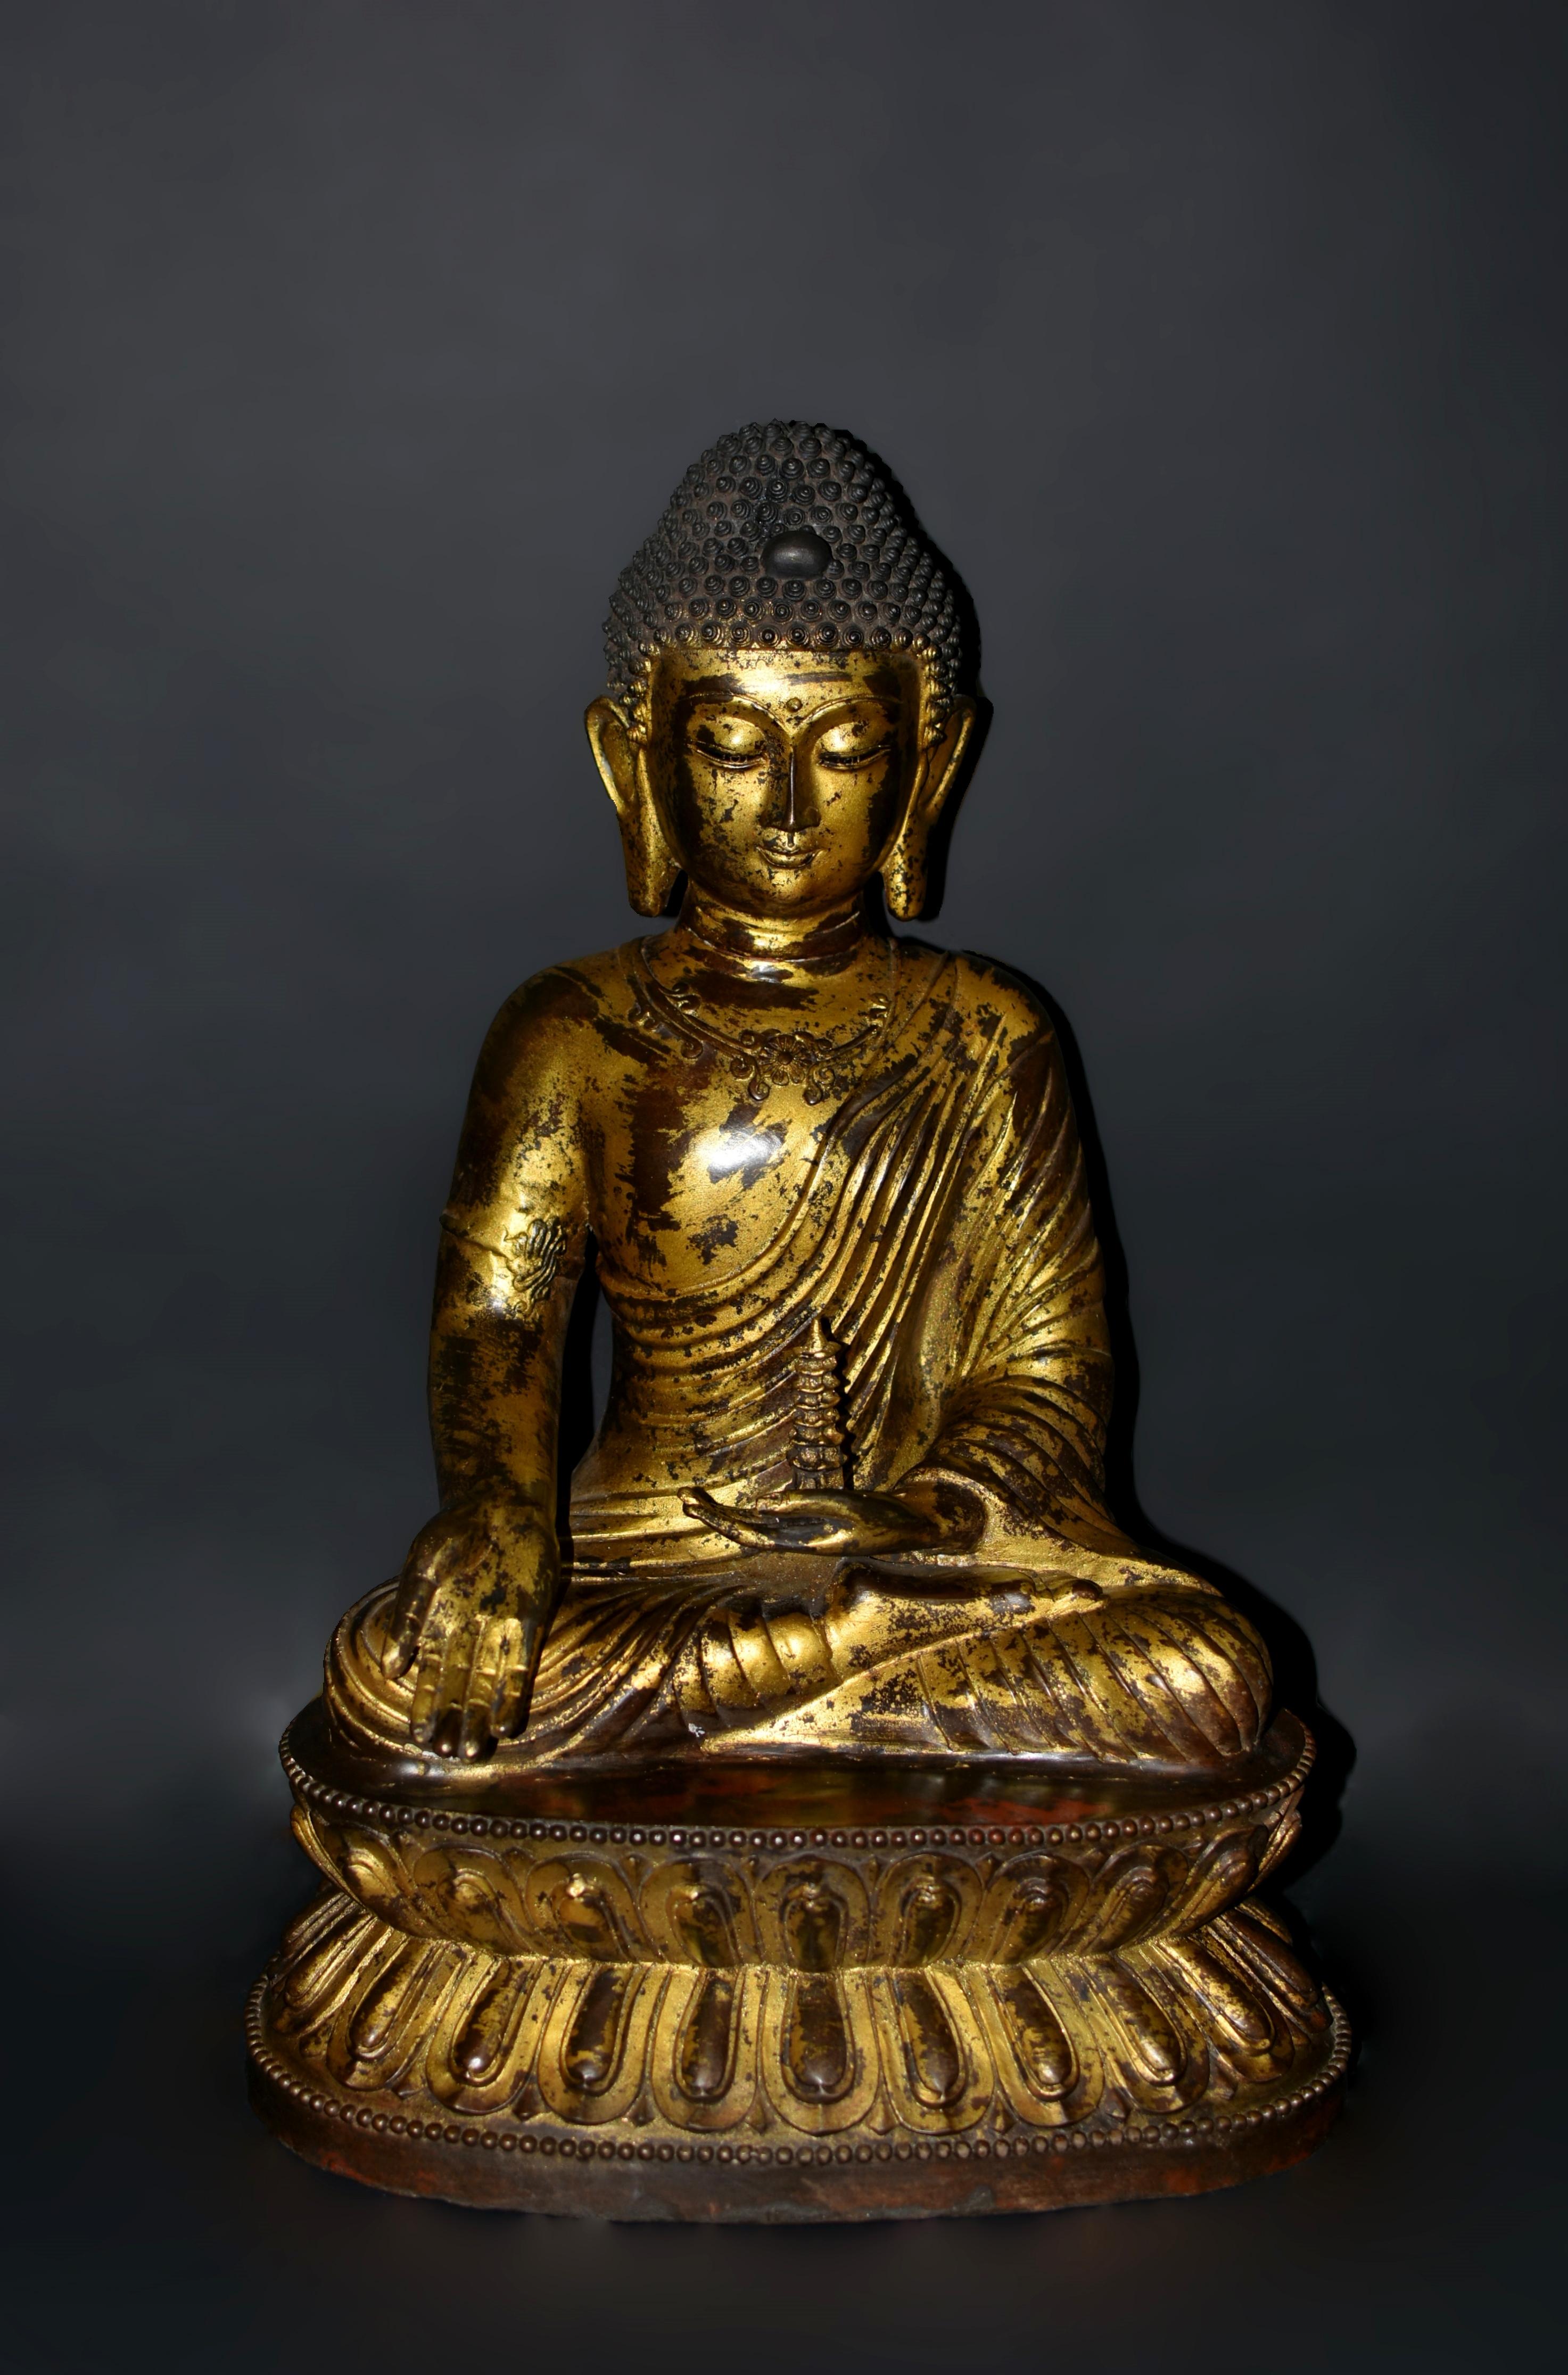 The magnificent 31 lb bronze Buddha statue, crafted in the Ming dynasty style, captivates with its timeless beauty and serene presence. Depicting a young Shakyamuni, the statue exudes tranquility with downcast eyes beneath high arched brows and long